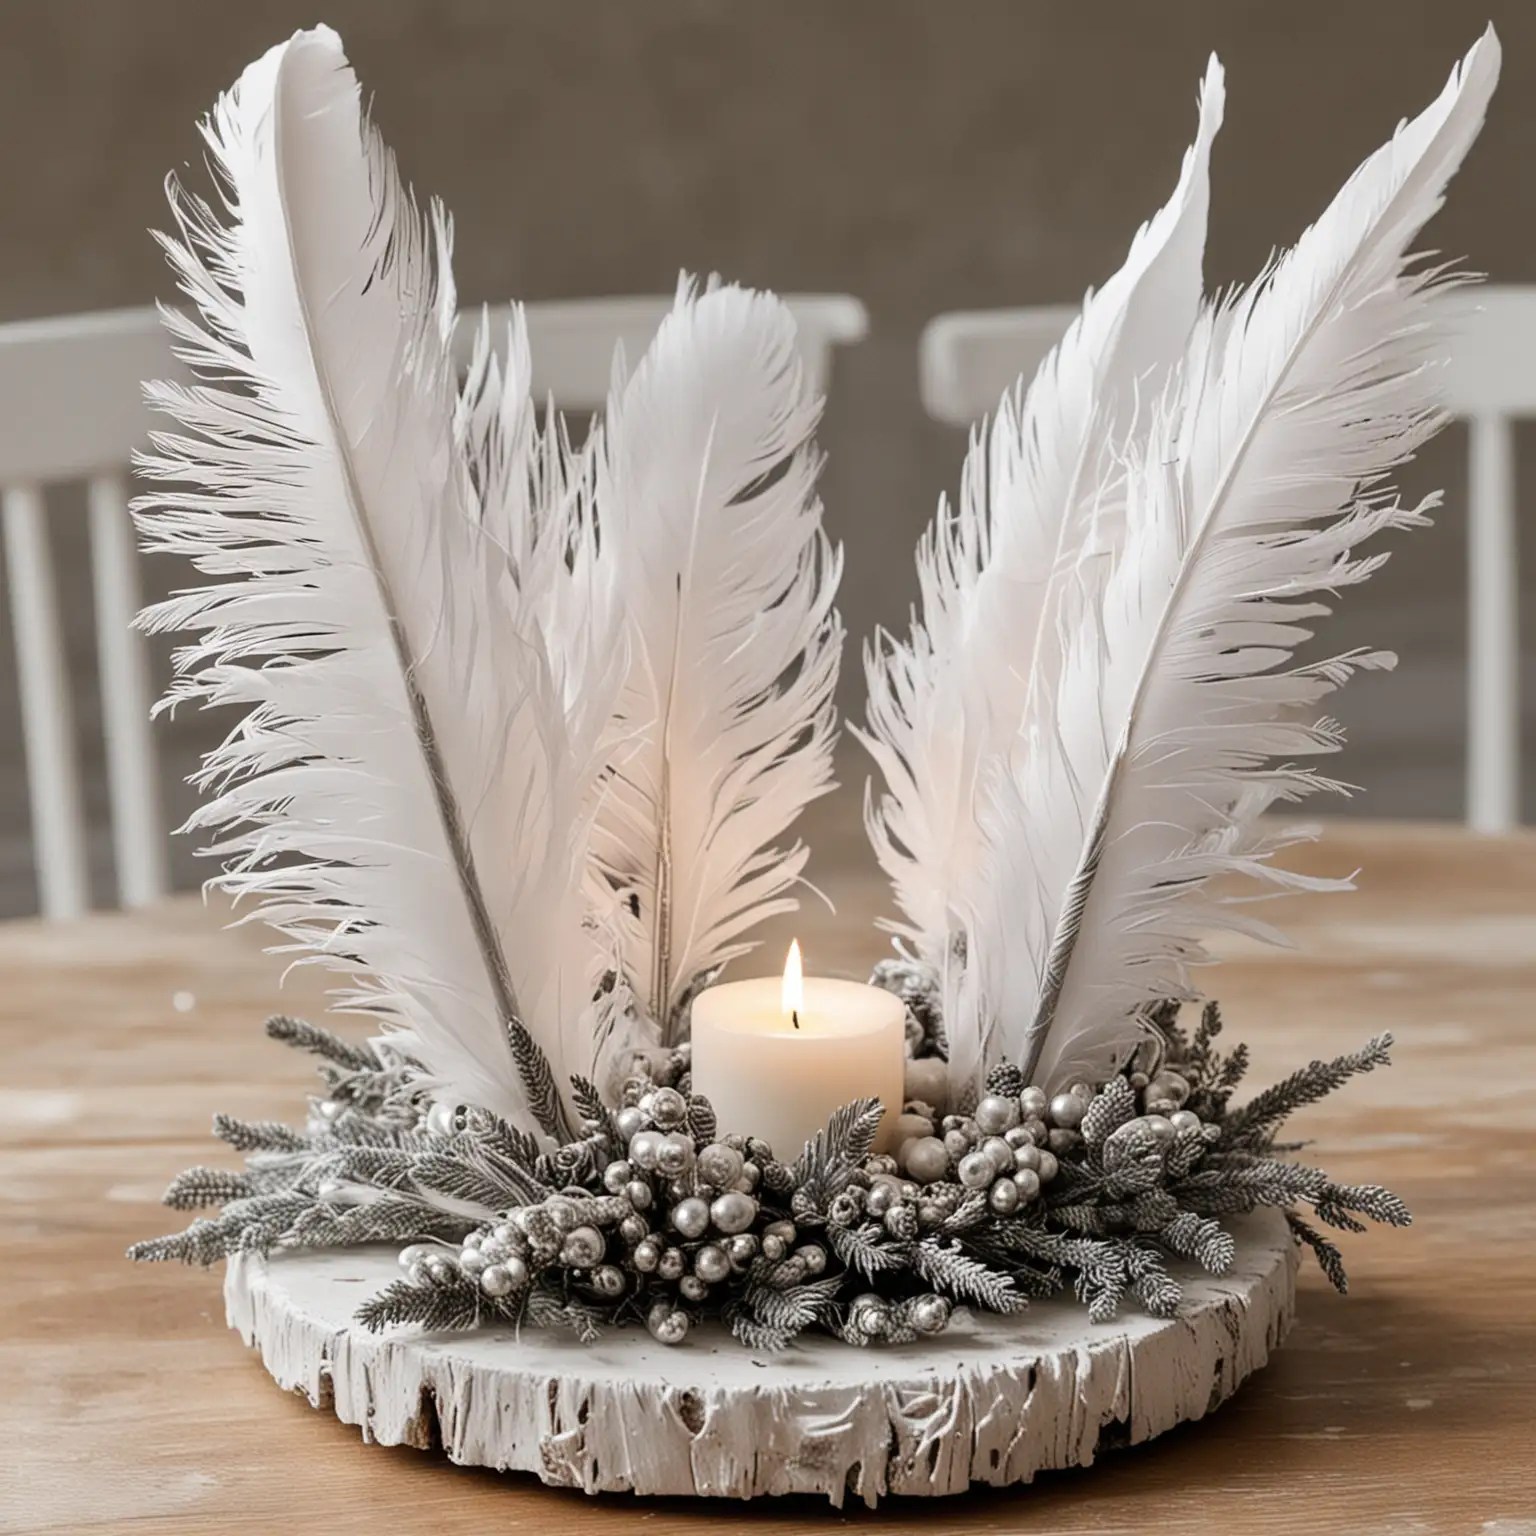 a simple and small DIY boho winter wedding centerpiece using silver and white boho feathers